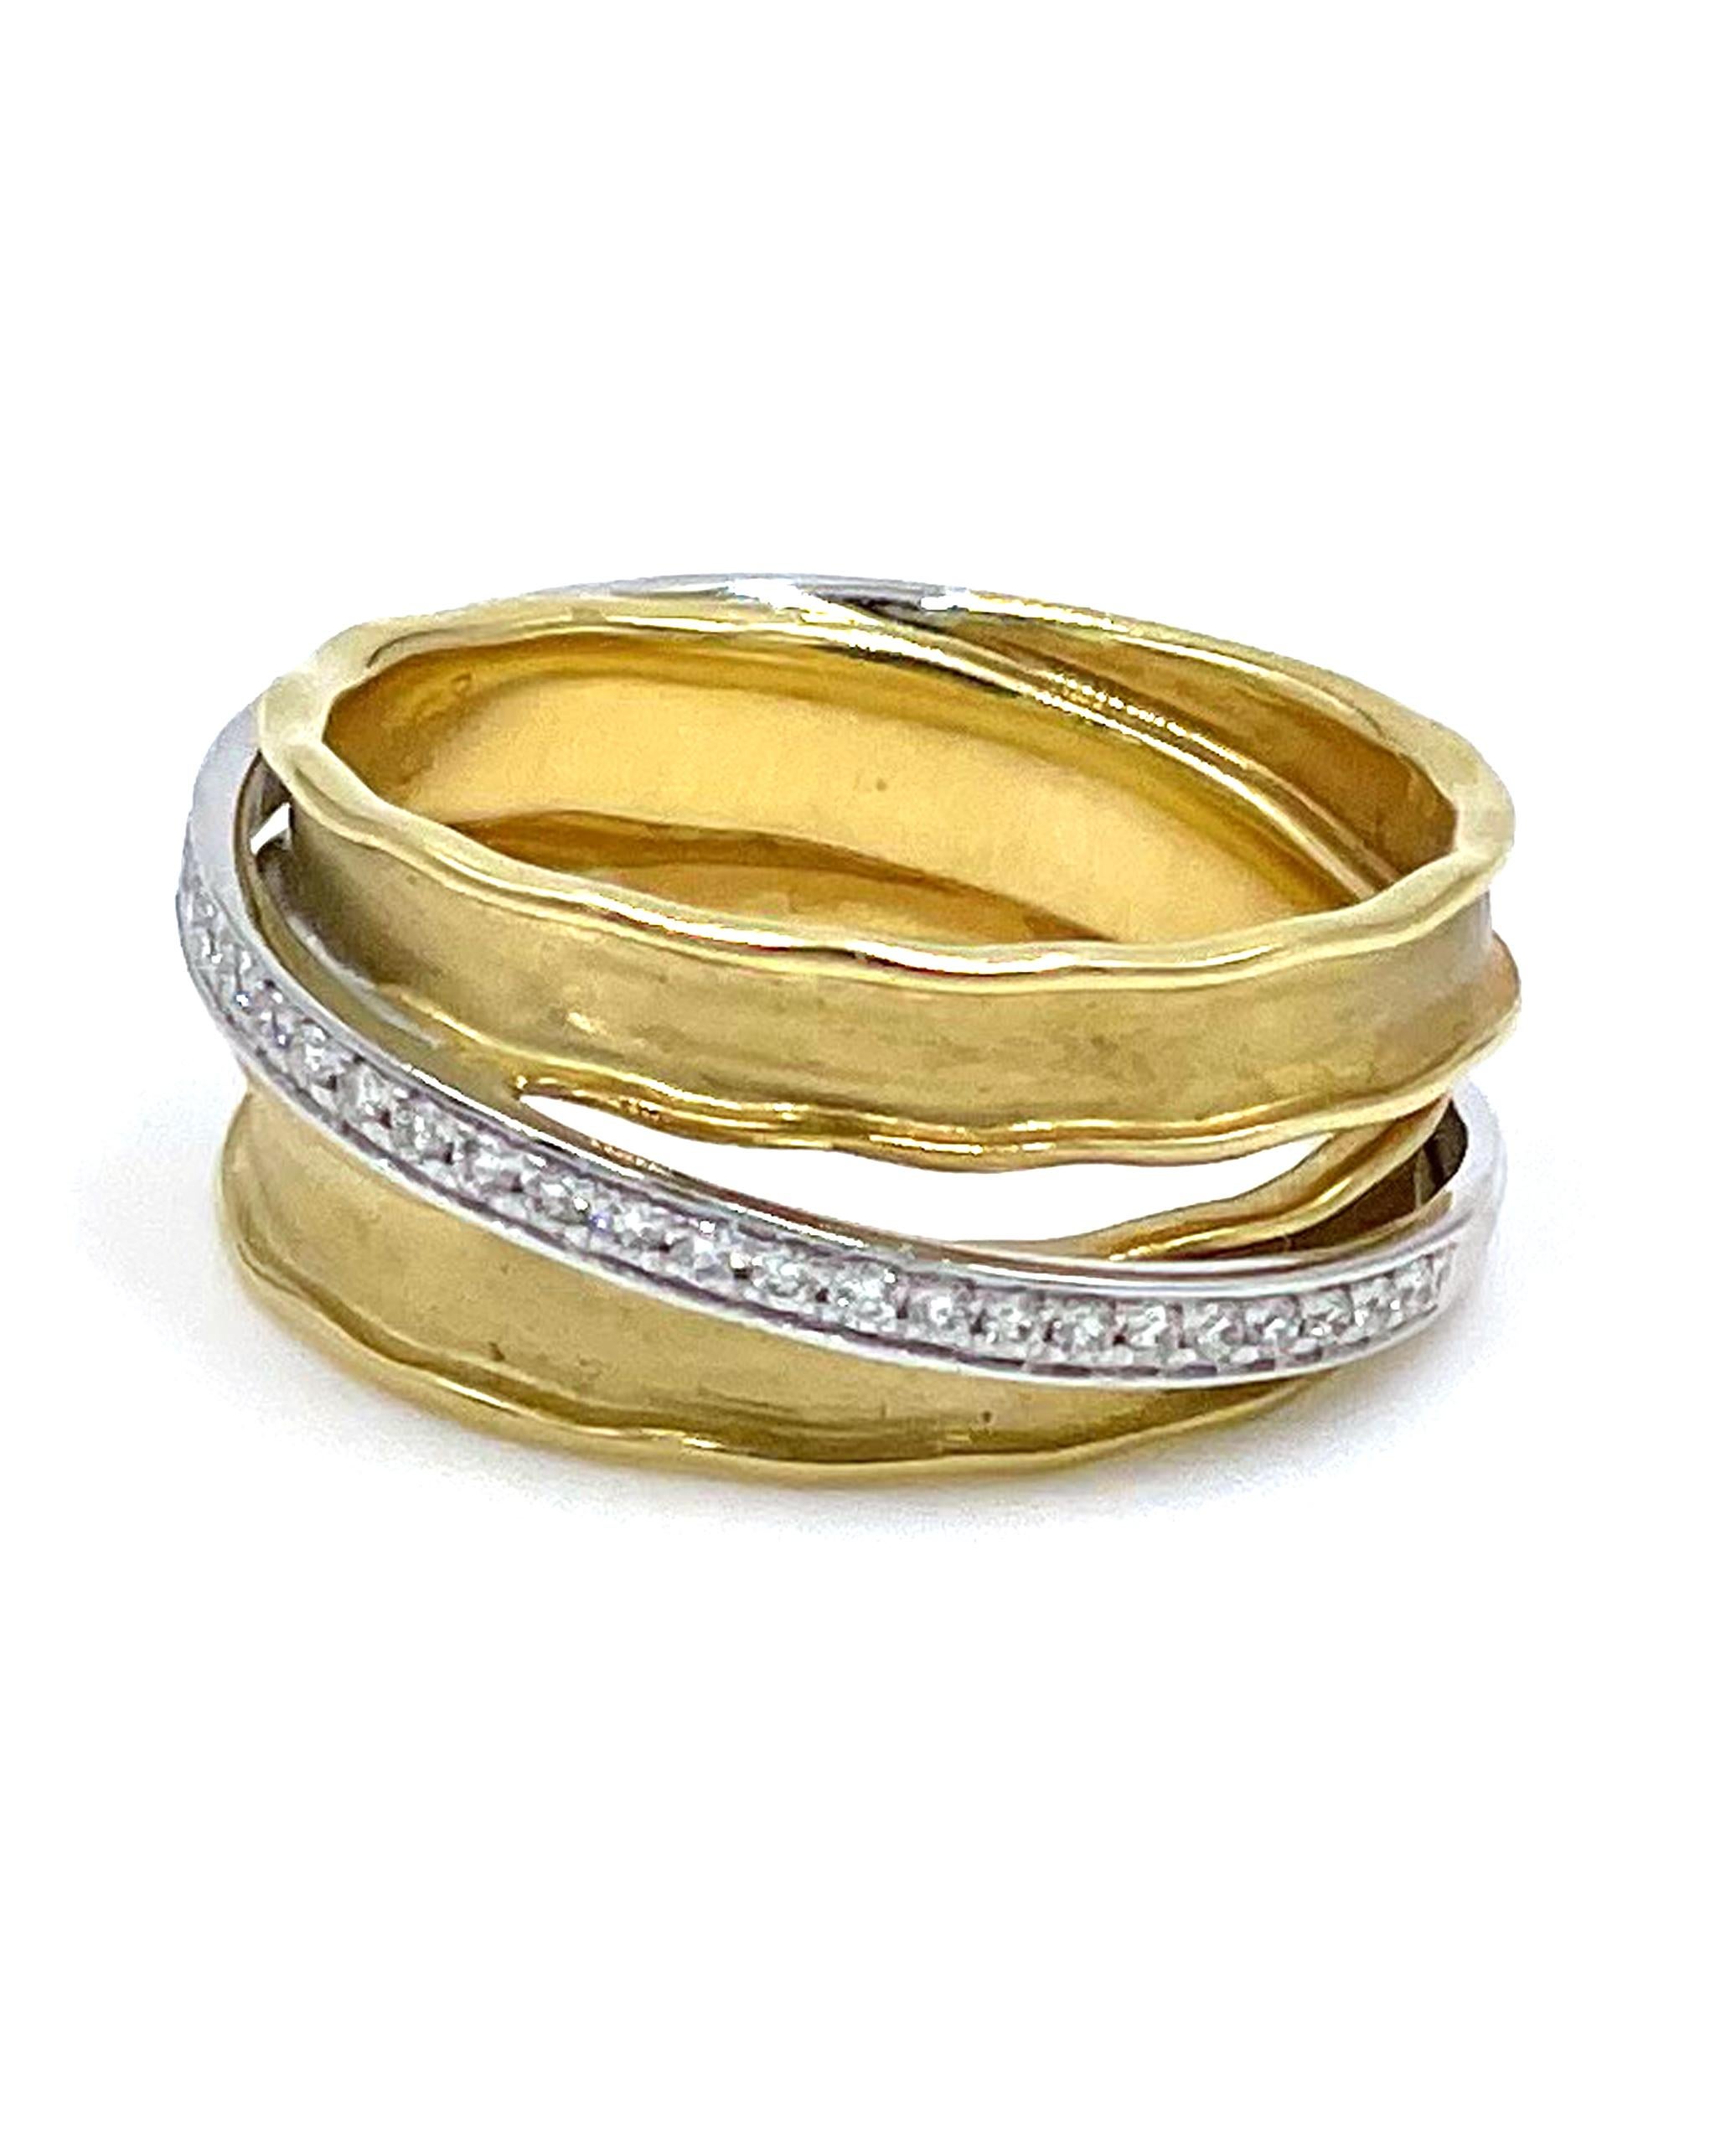 Simon G. LR2576 18K white and yellow gold organic woven ring with round diamonds totaling 0.14 carats.

* 9.10mm wide and tapers down to 6.40mm
* Diamonds are G/H color, VS2/SI1 clarity
* Finger size 6.25